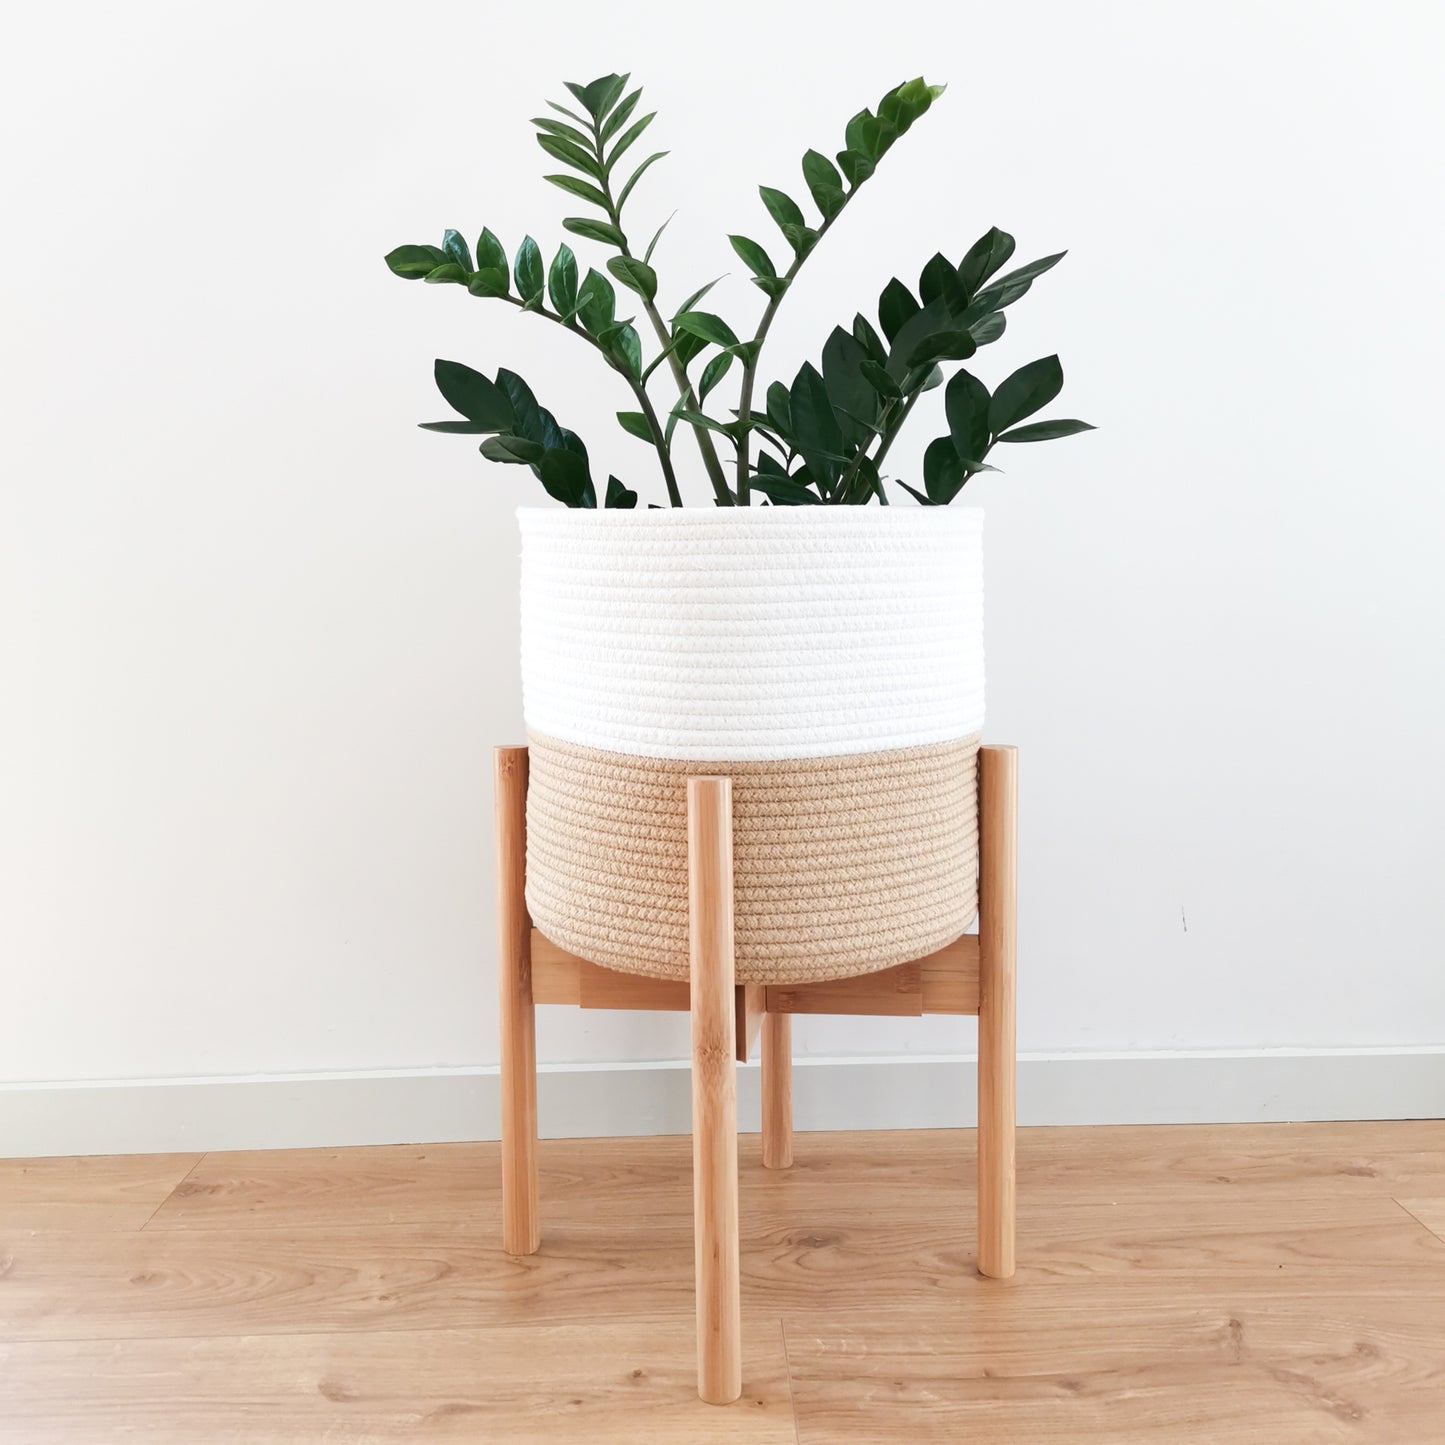 Minimalist wood plant stand with a classic mid-century modern style. These tall planter stands can be turned upside down to make your plants more eye-catching. They can also be adjusted to fit different pot sizes.